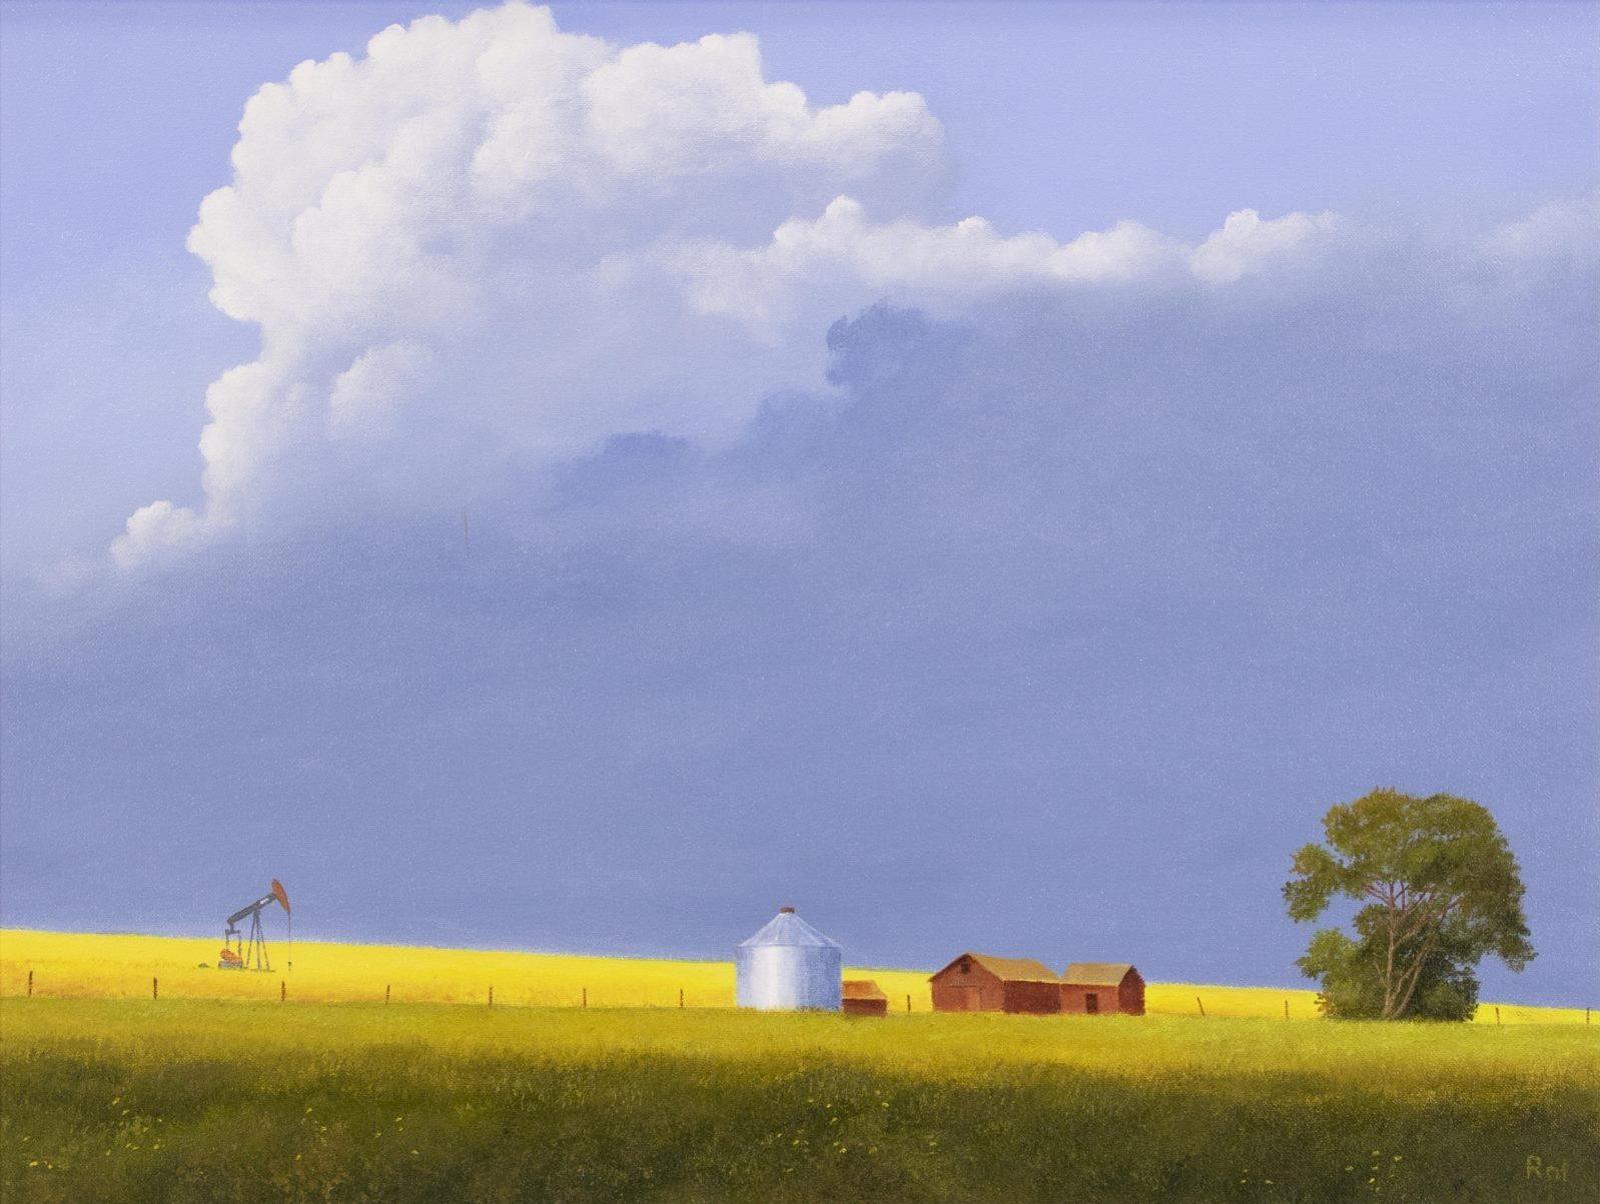 Ted Raftery (1938) - Passing Storm